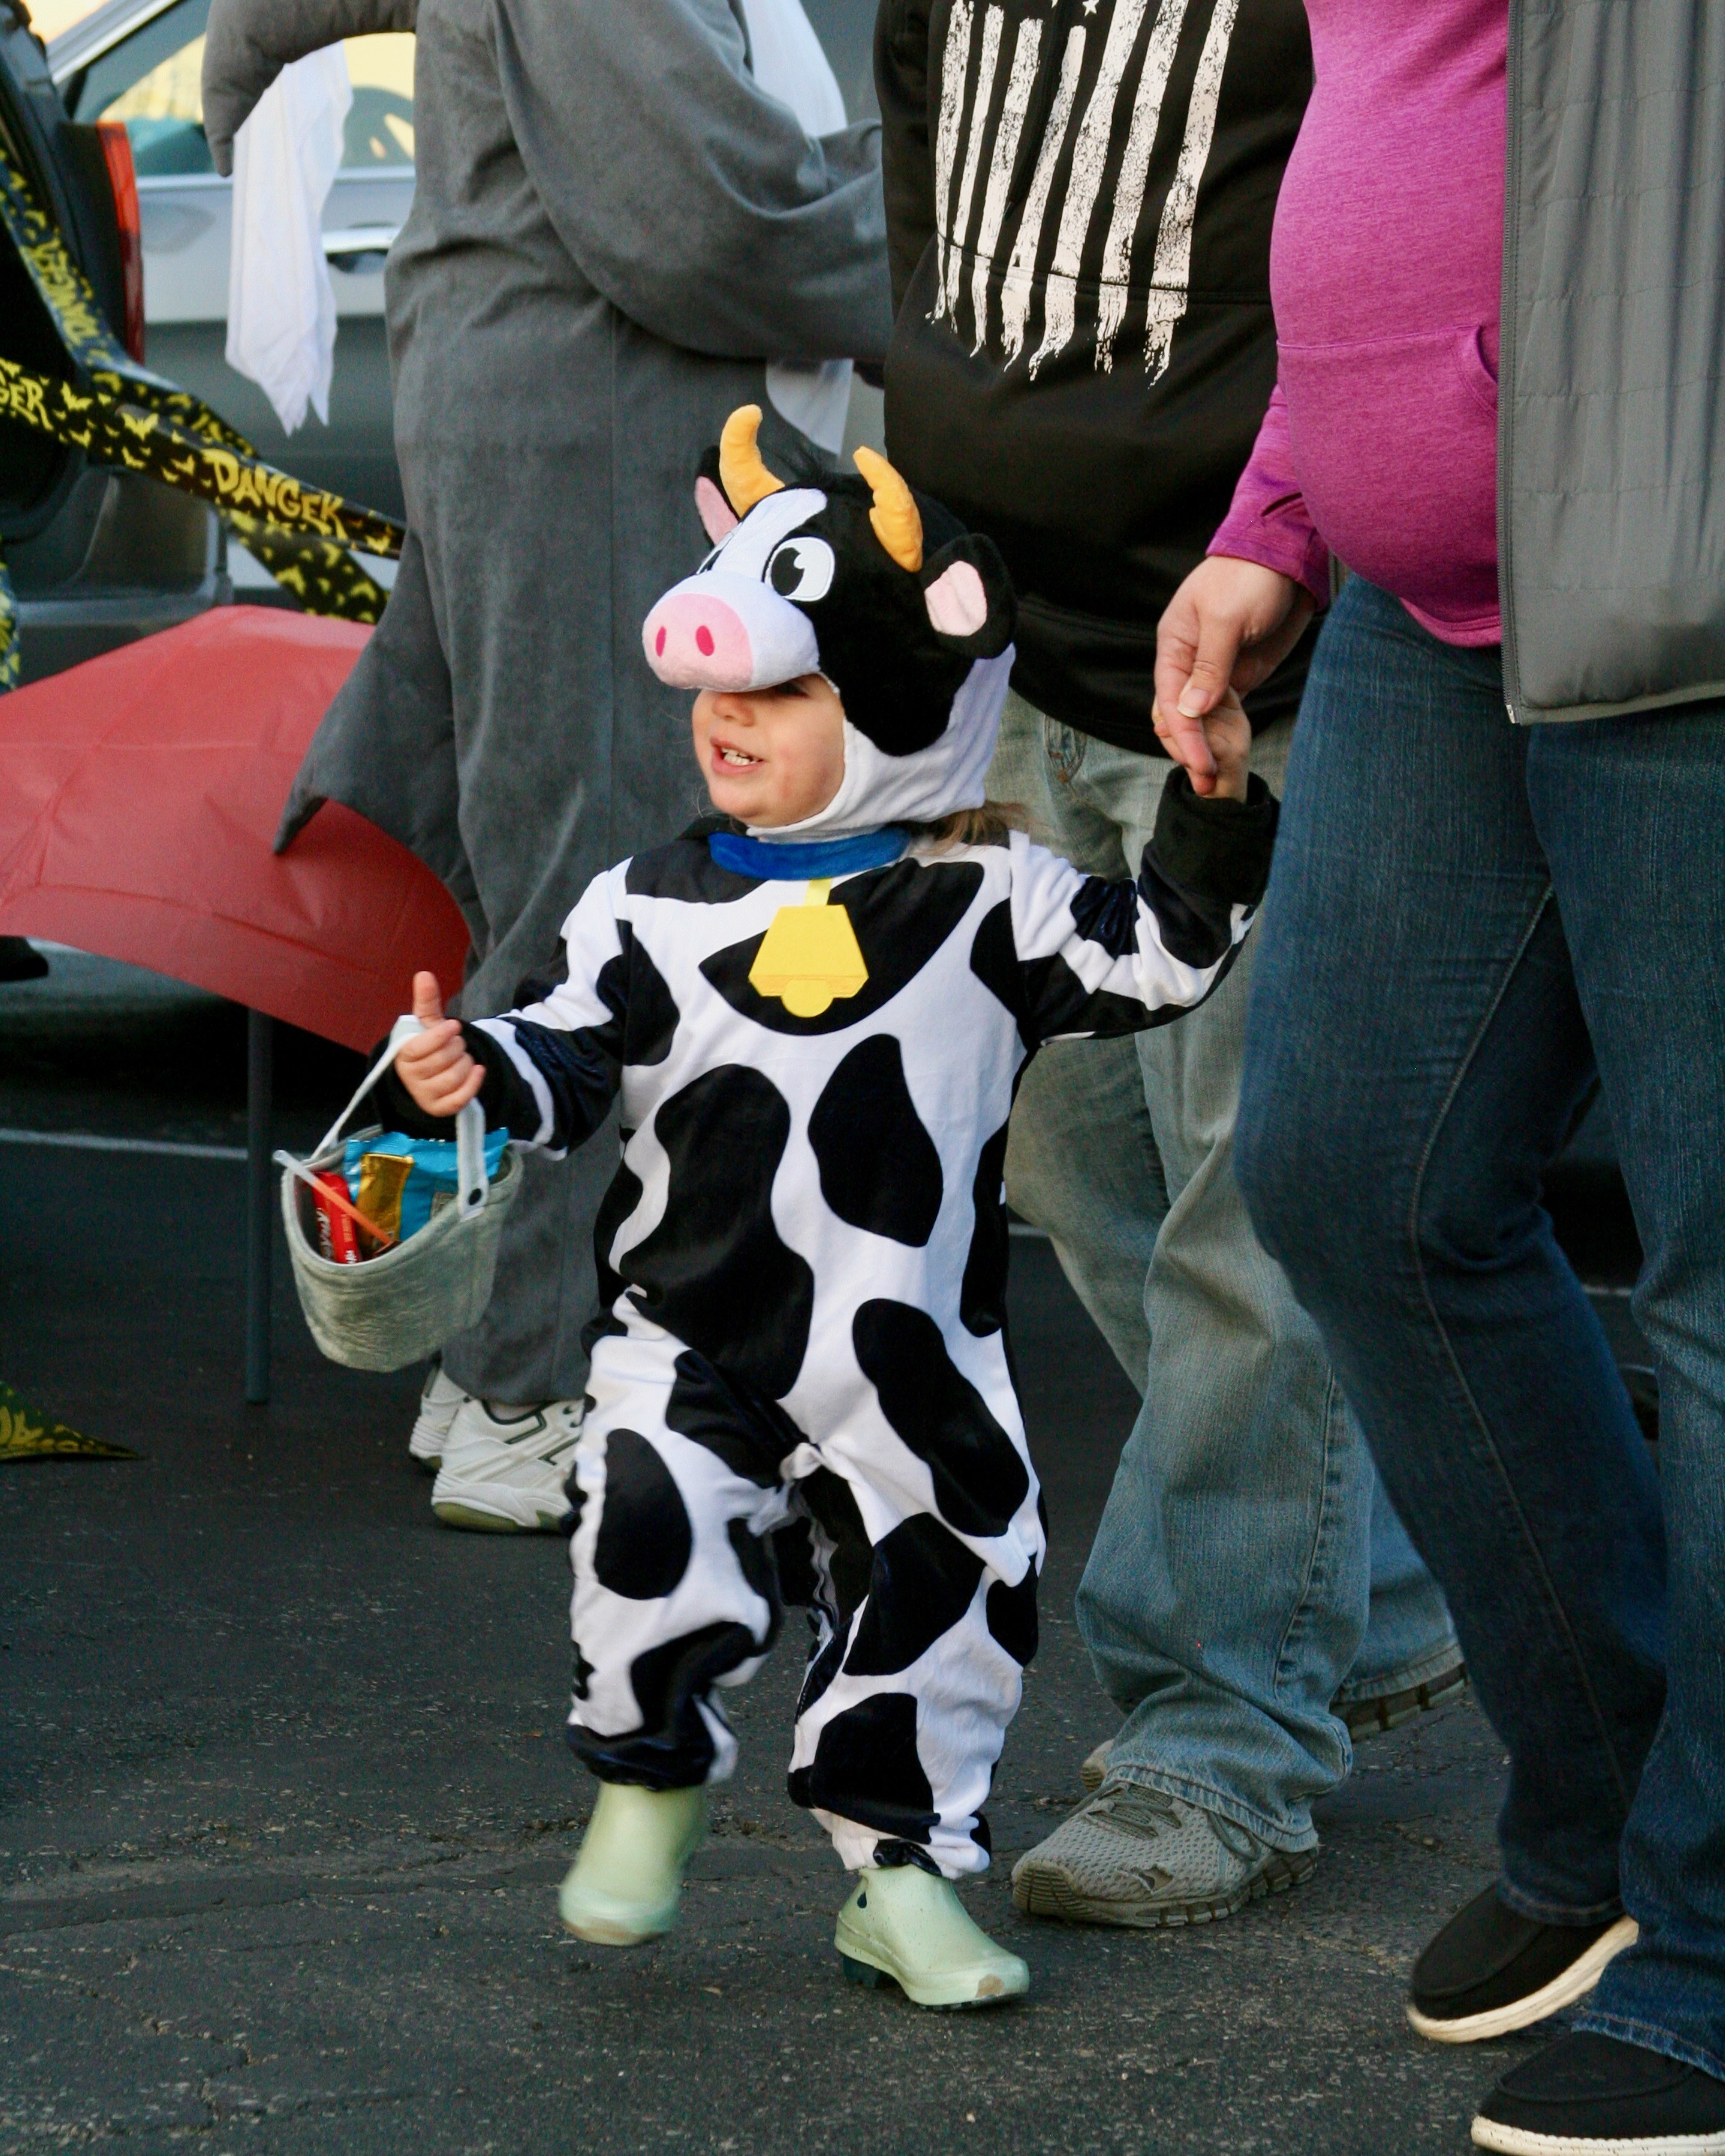 Toddler with candy basket dressed as a cow